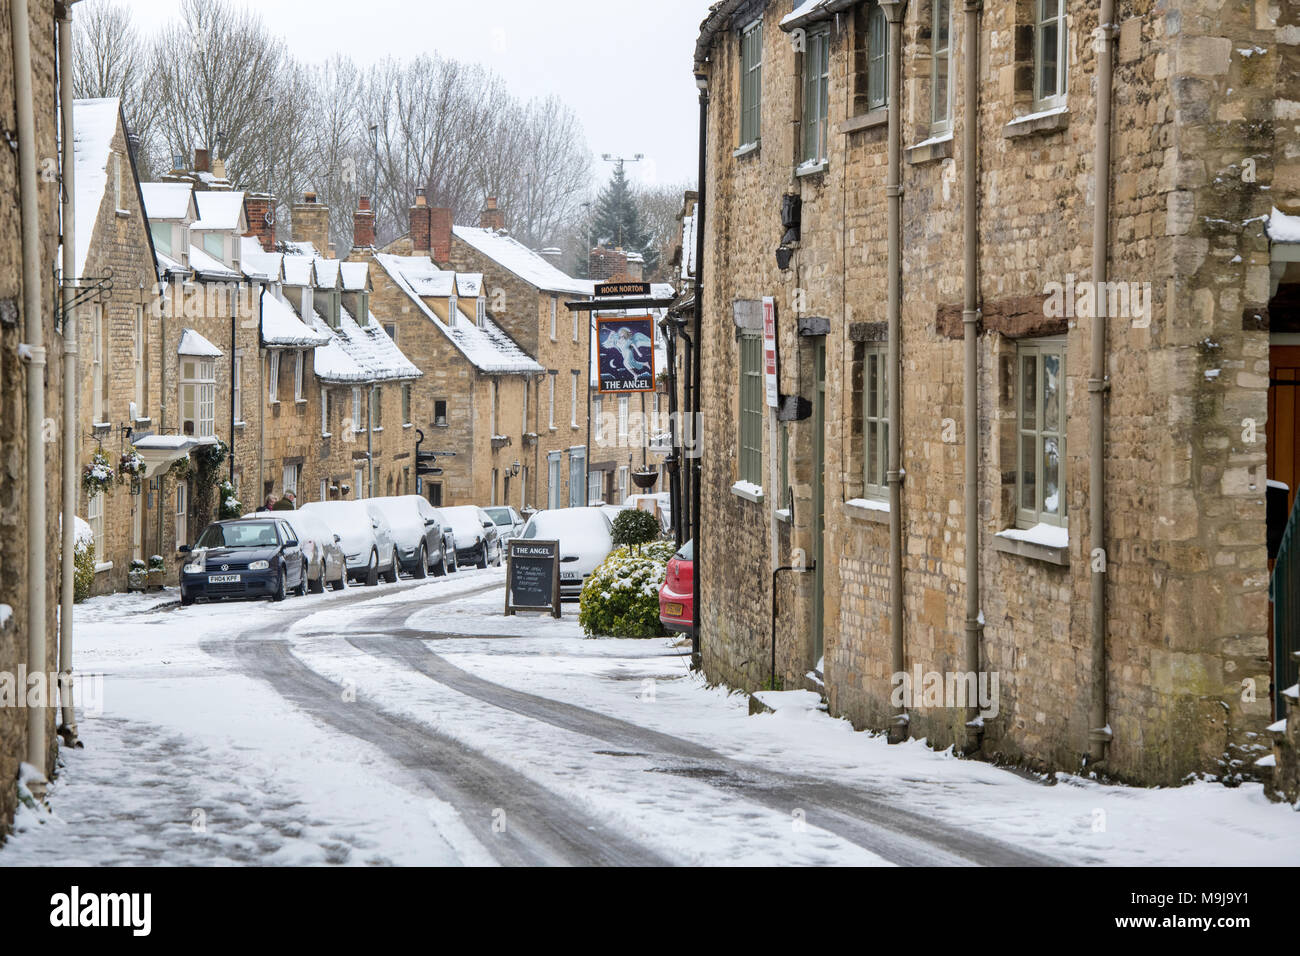 Witney street in inverno la neve. Burford, Cotswolds, Oxfordshire, Inghilterra Foto Stock